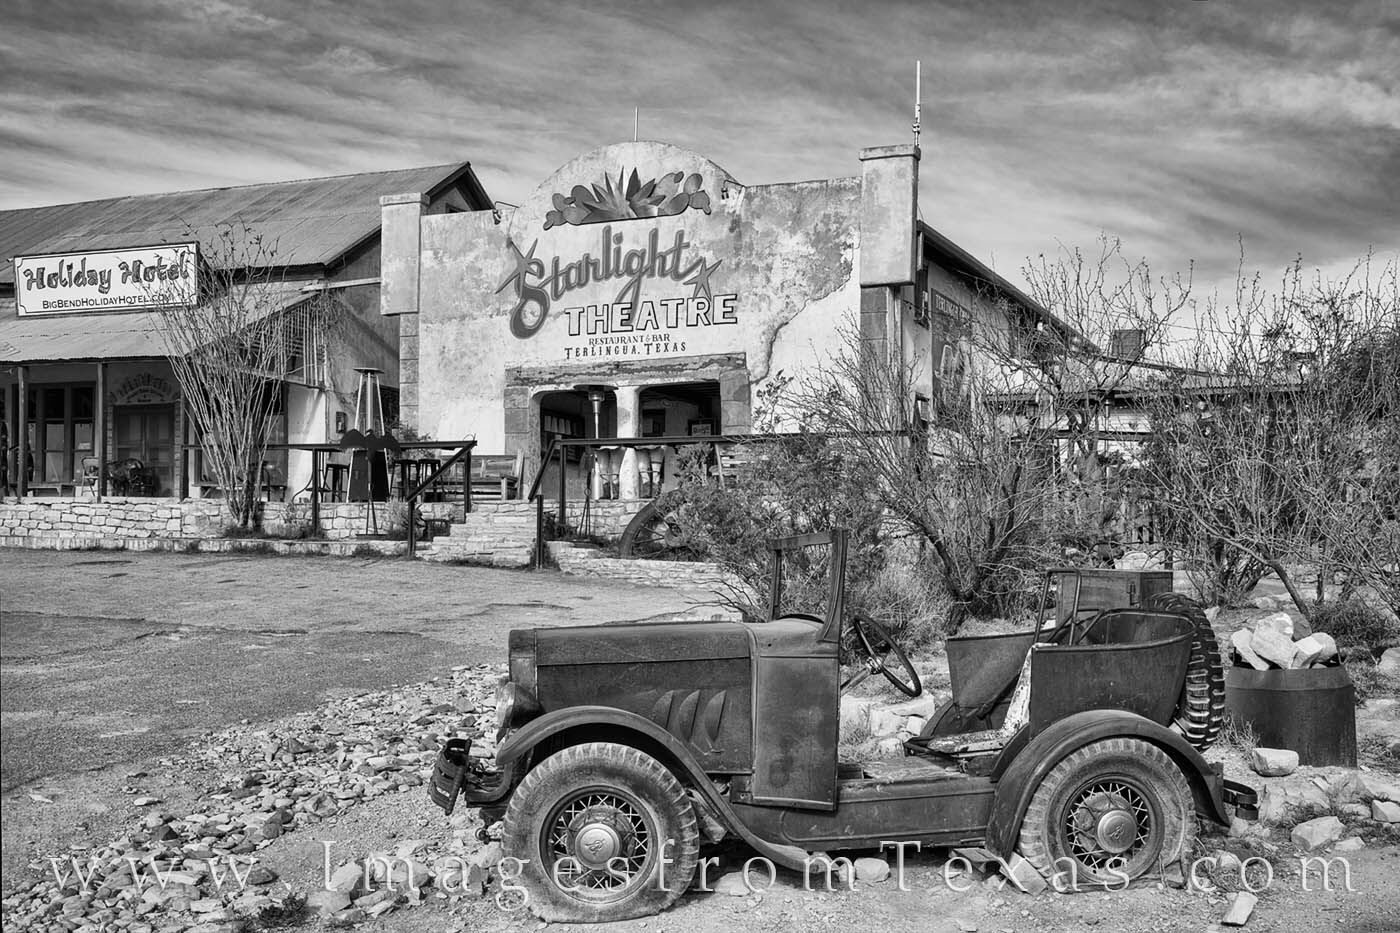 The Starlight Theater in Terlingua, Texas, on a cool spring morning in black and white.